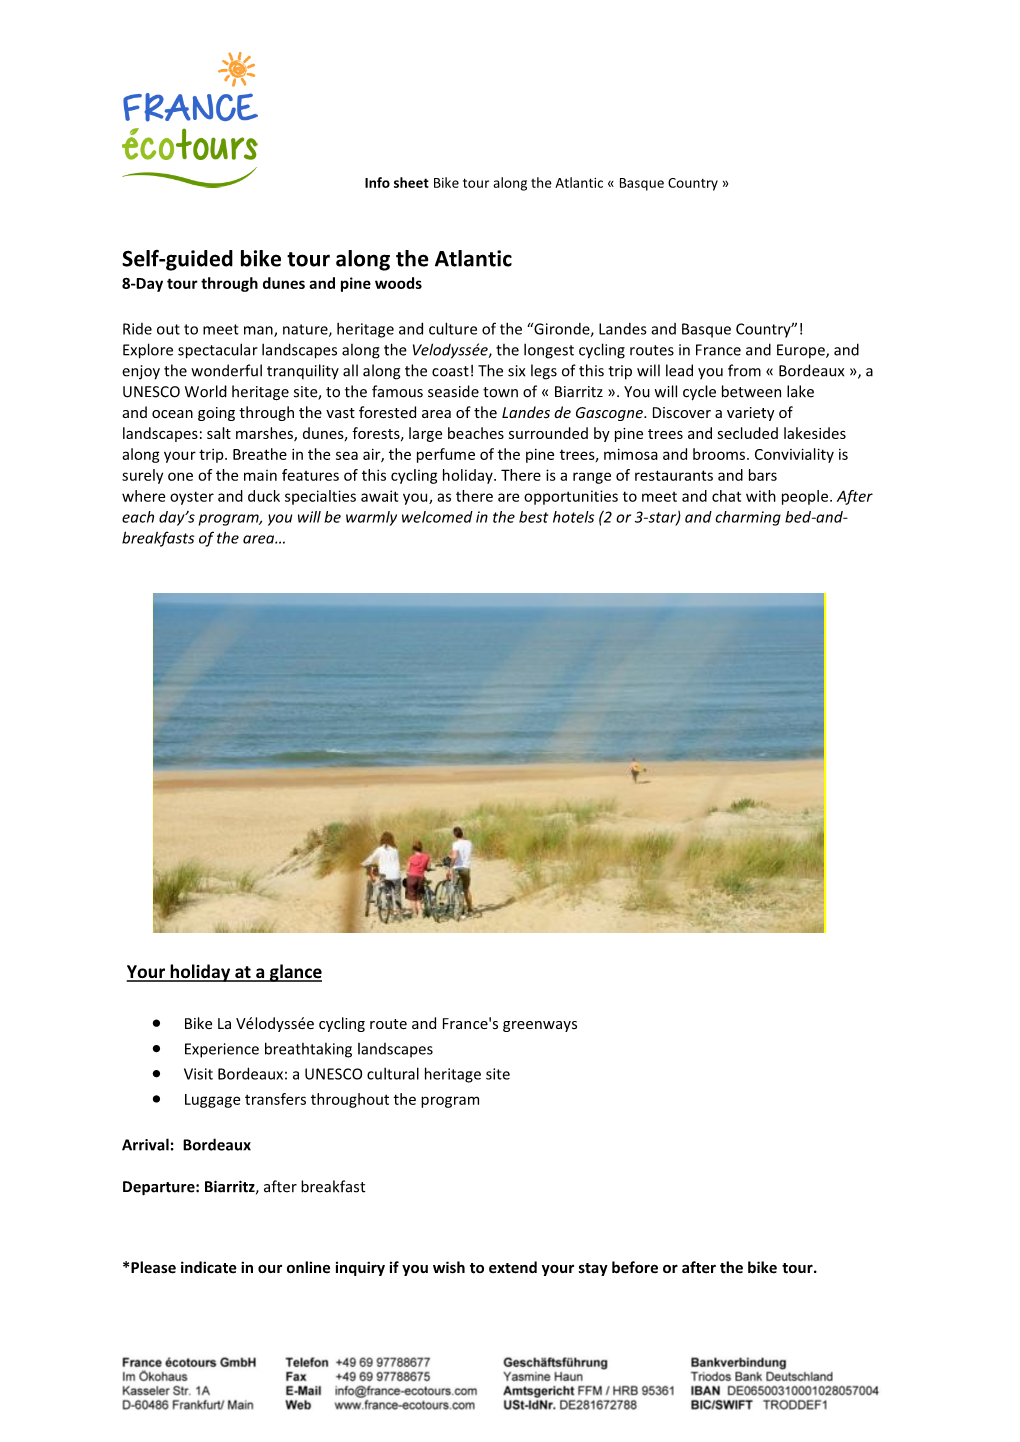 Self-Guided Bike Tour Along the Atlantic 8-Day Tour Through Dunes and Pine Woods